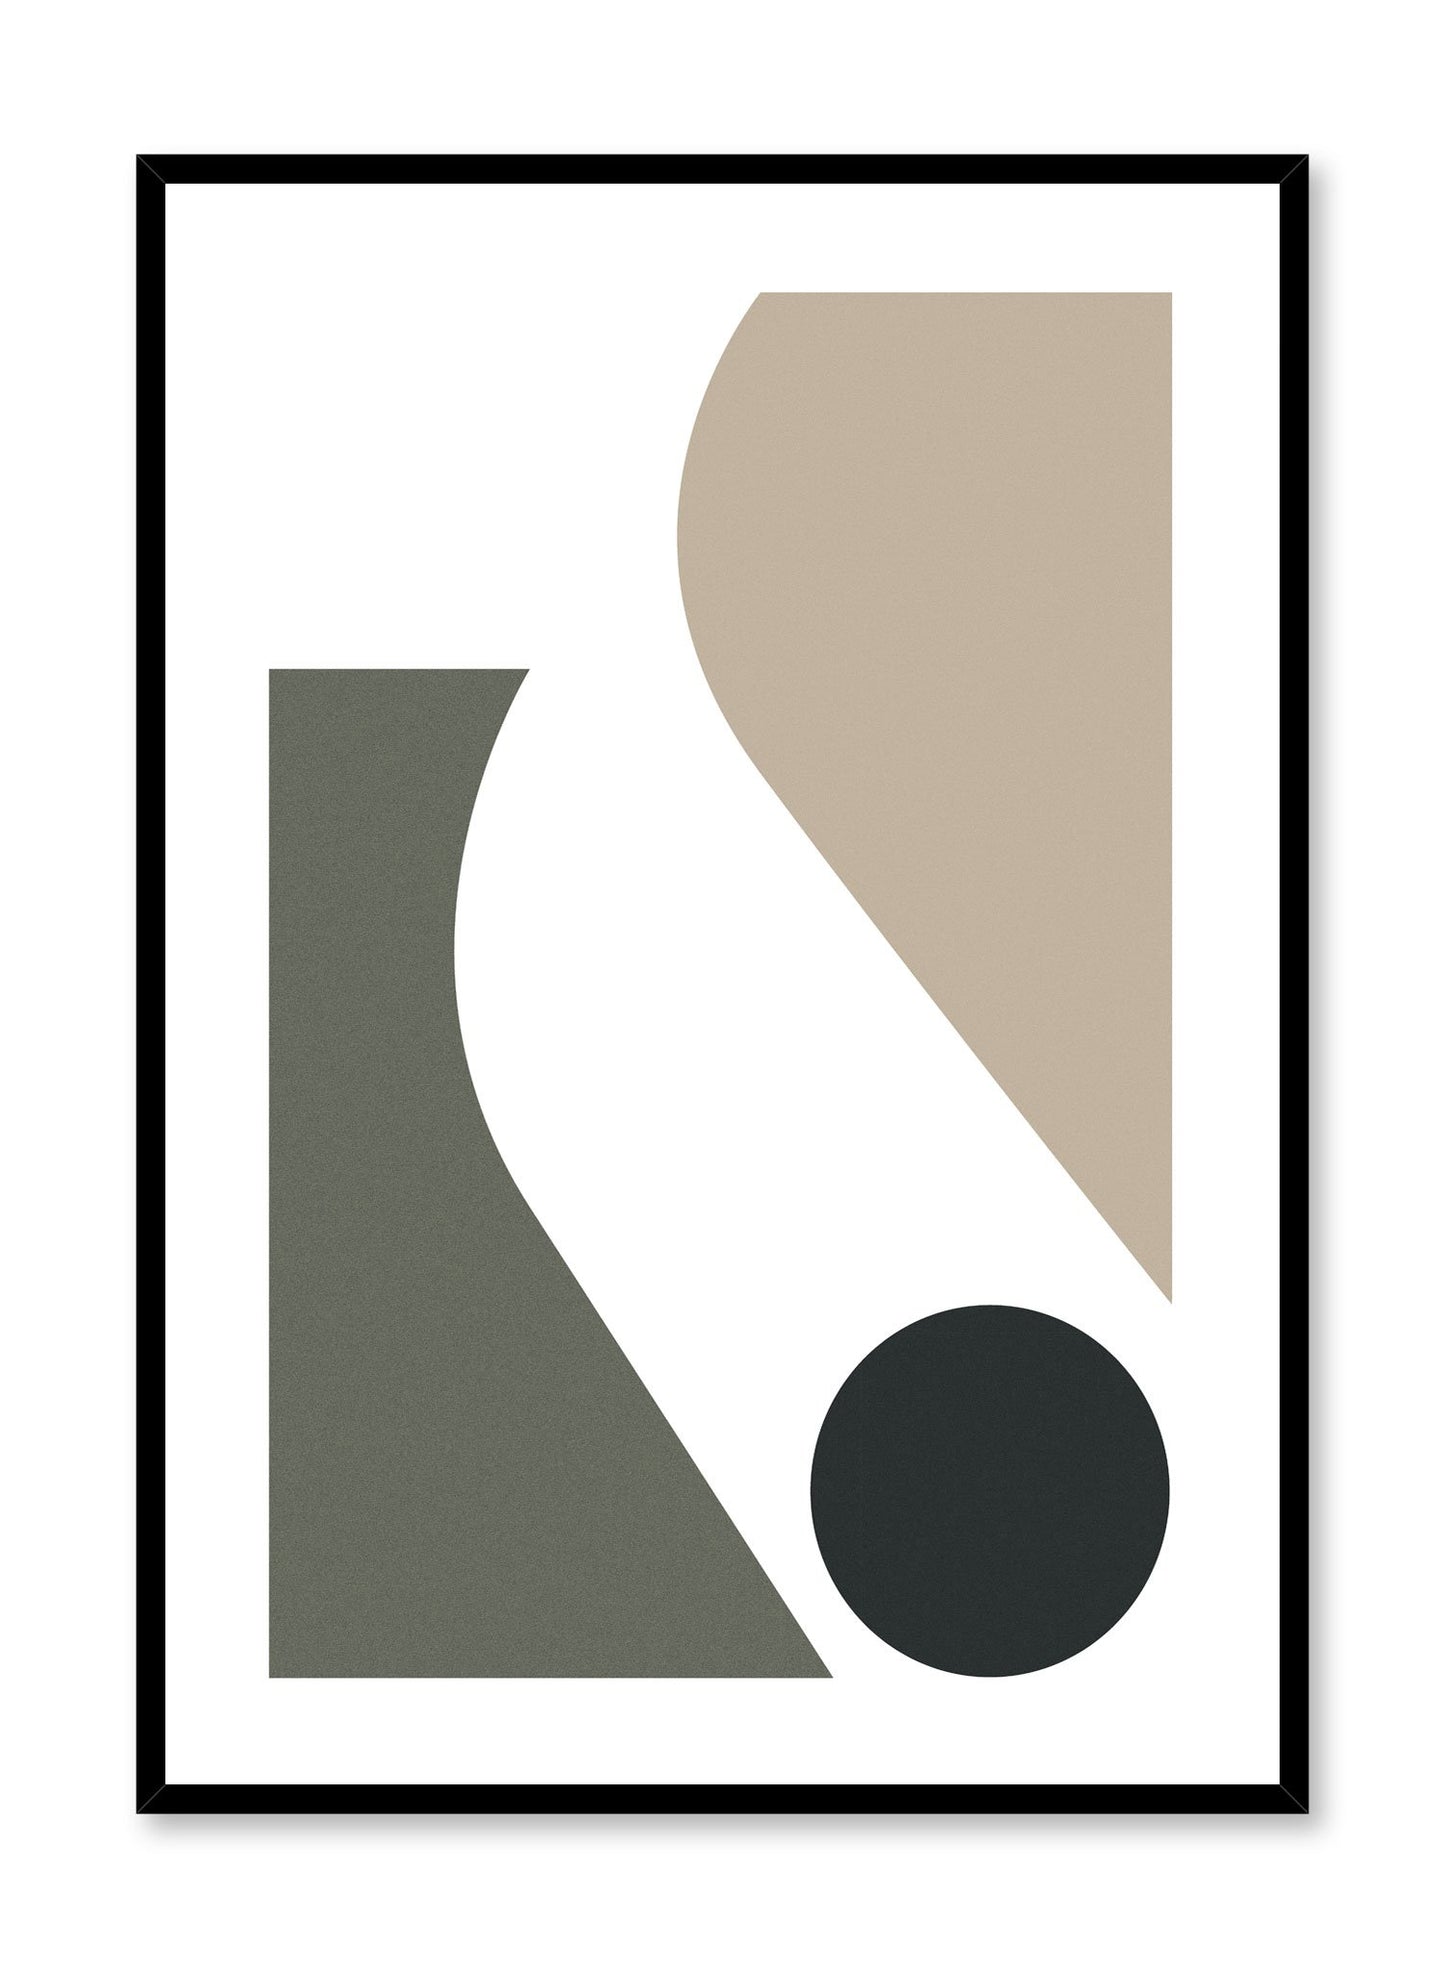 Minimalist design poster by Opposite Wall with abstract curved shapes